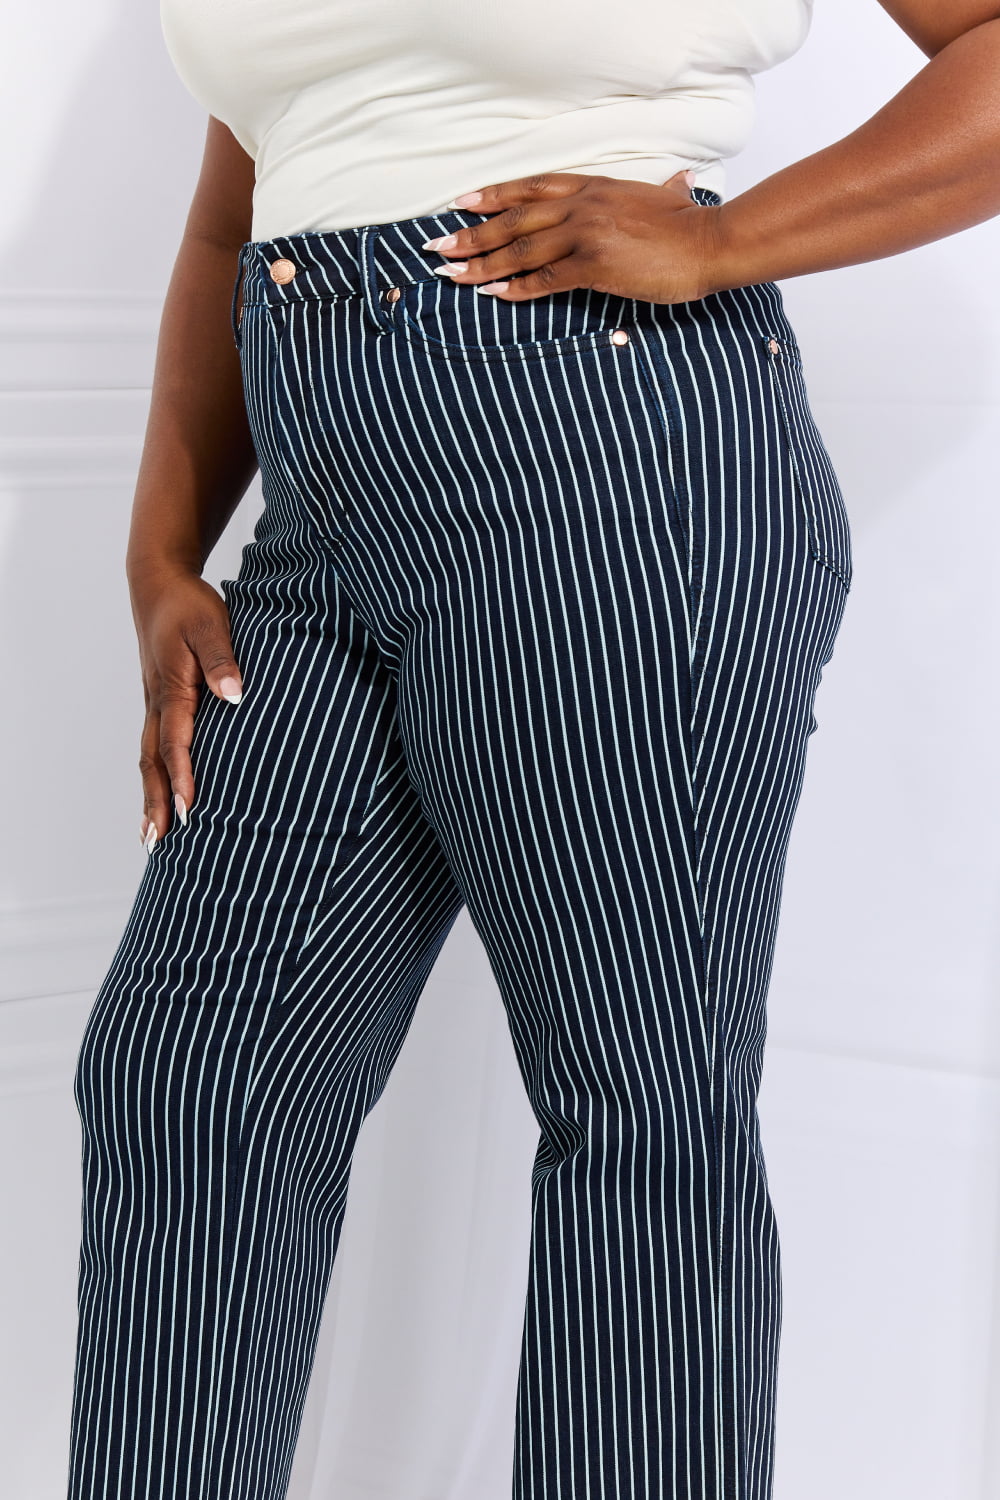 High Waisted Striped Jeans With Tummy Control